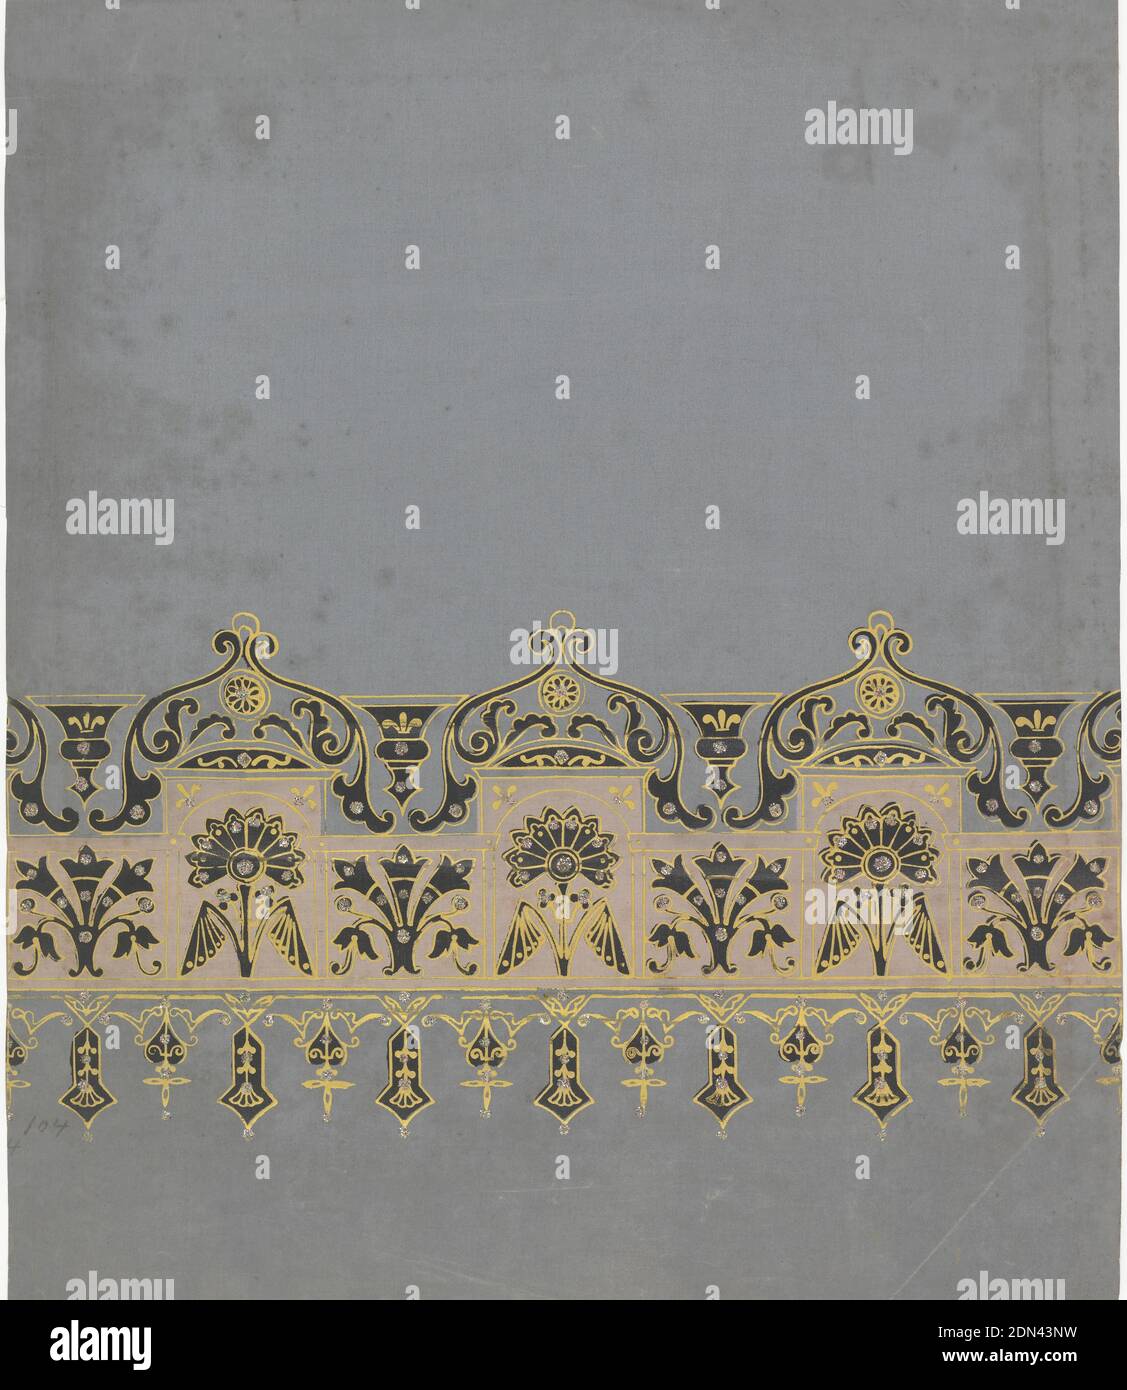 Window shade, Block-printed, Band of stylized floral motifs, with two motifs alternating, near bottom edge. Printed in black and gold with mica flake highlights, on mauve background. Band of ornament above and pendants below. Printed on gray fabric support., USA, 1880–1900, Wallcoverings, Window shade Stock Photo